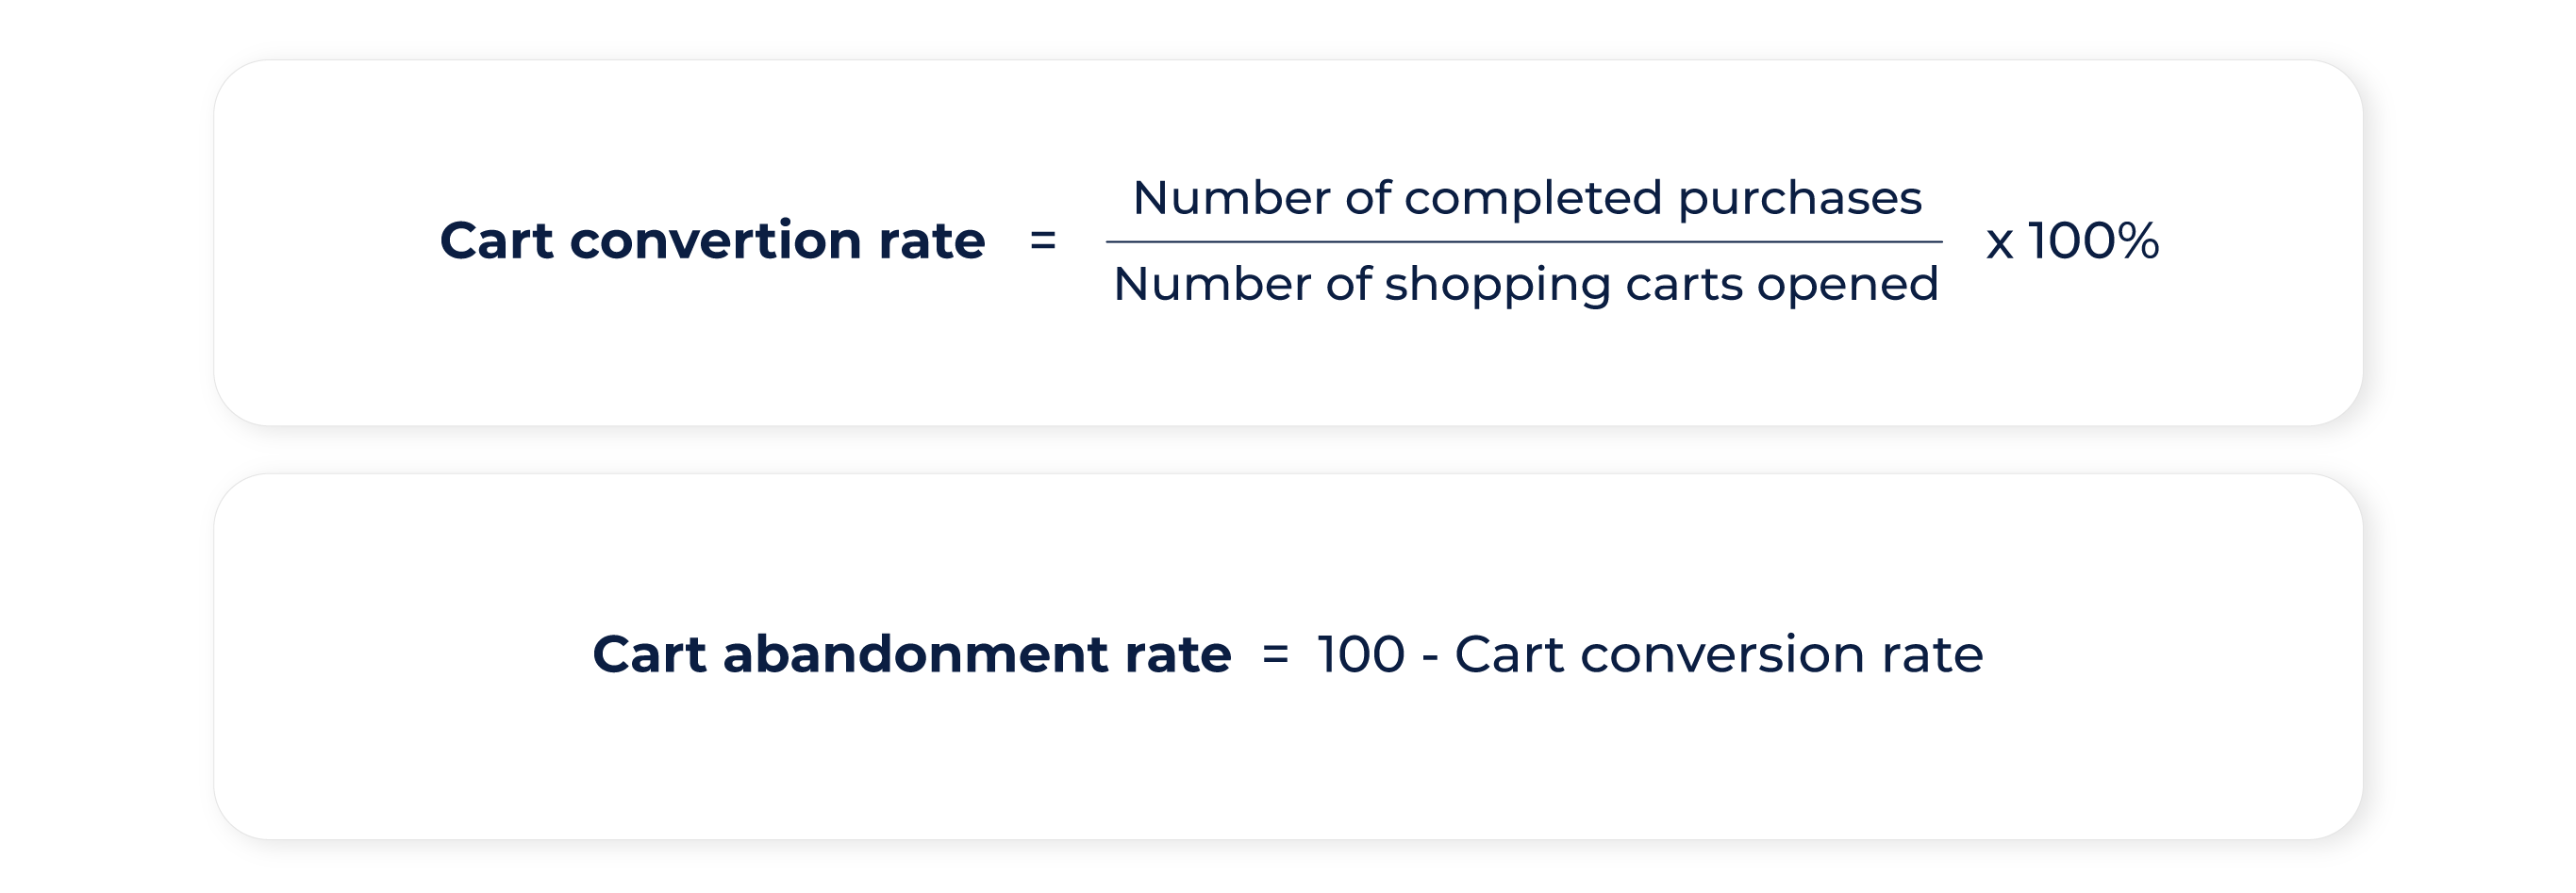 Cart conversion rate and card abandonment rate